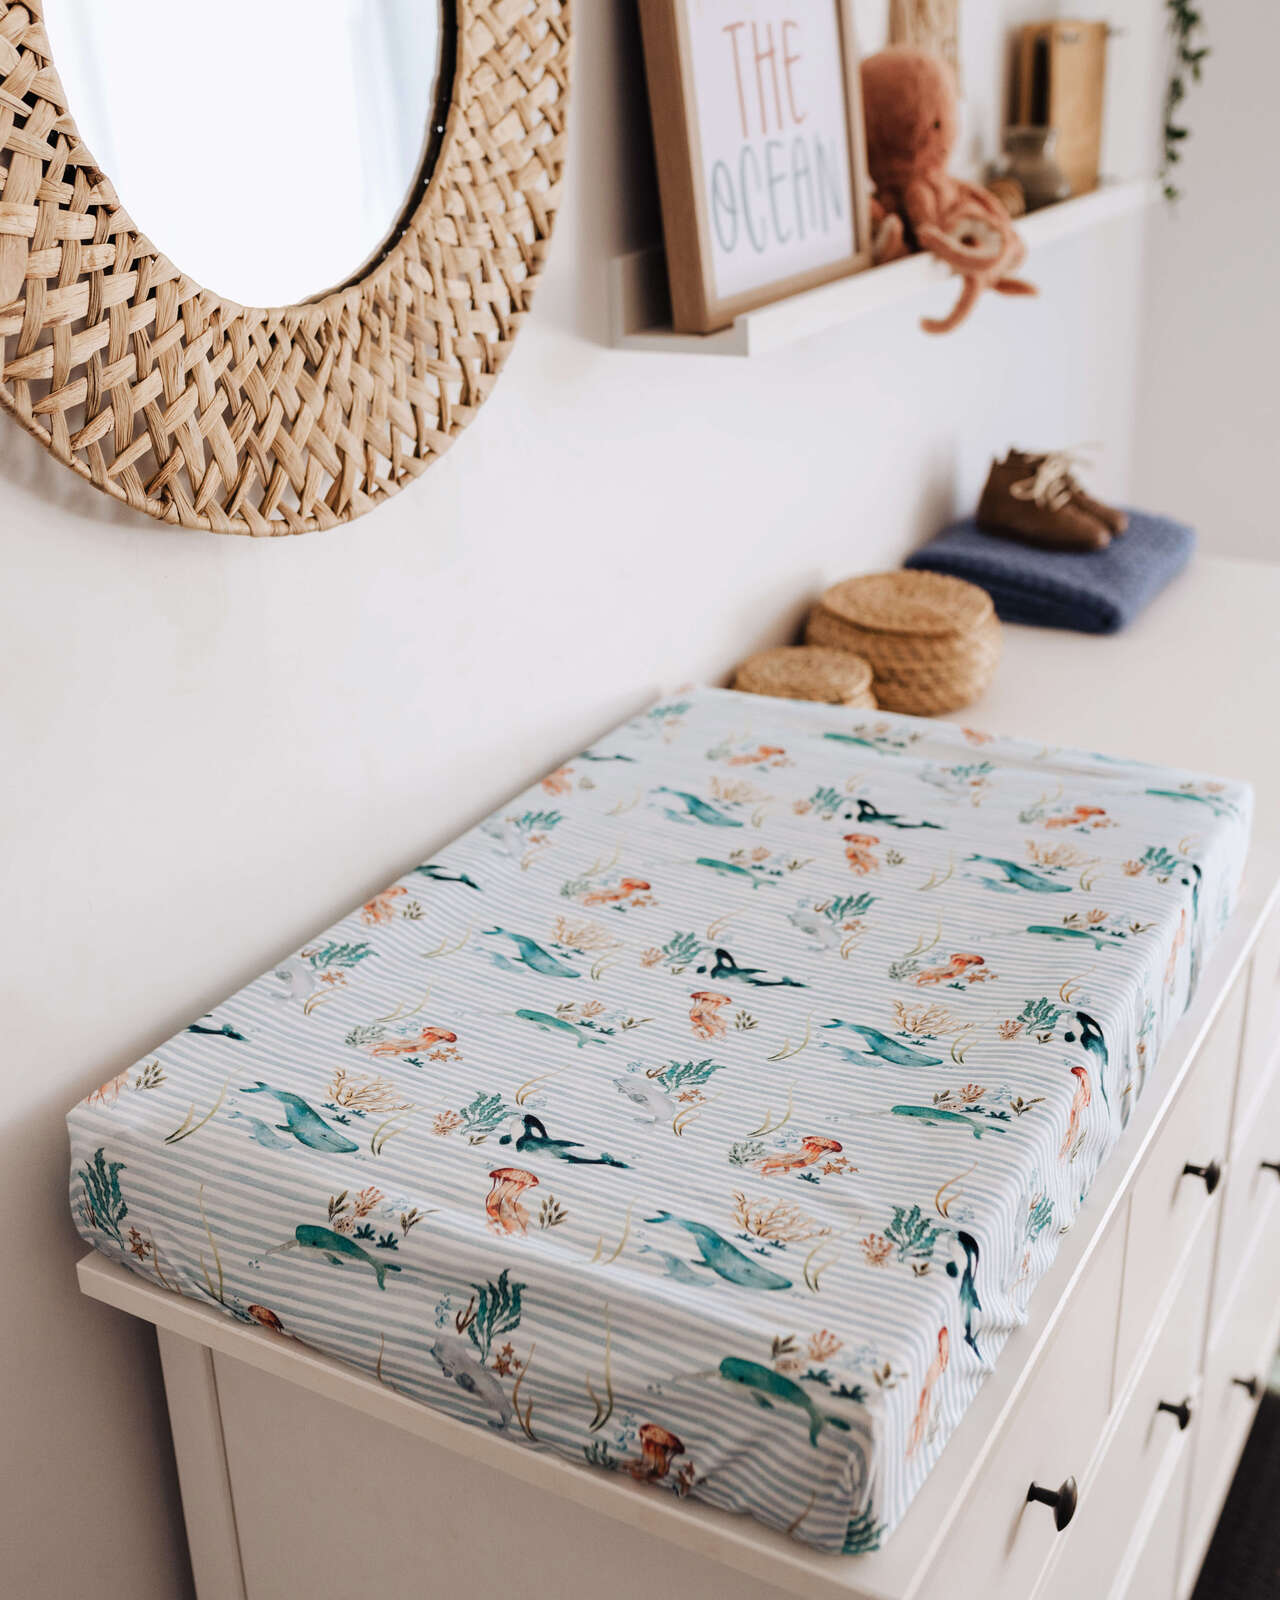 "Snuggle Hunny Kids" - Fitted Bassinet Sheet/Change Pad Cover